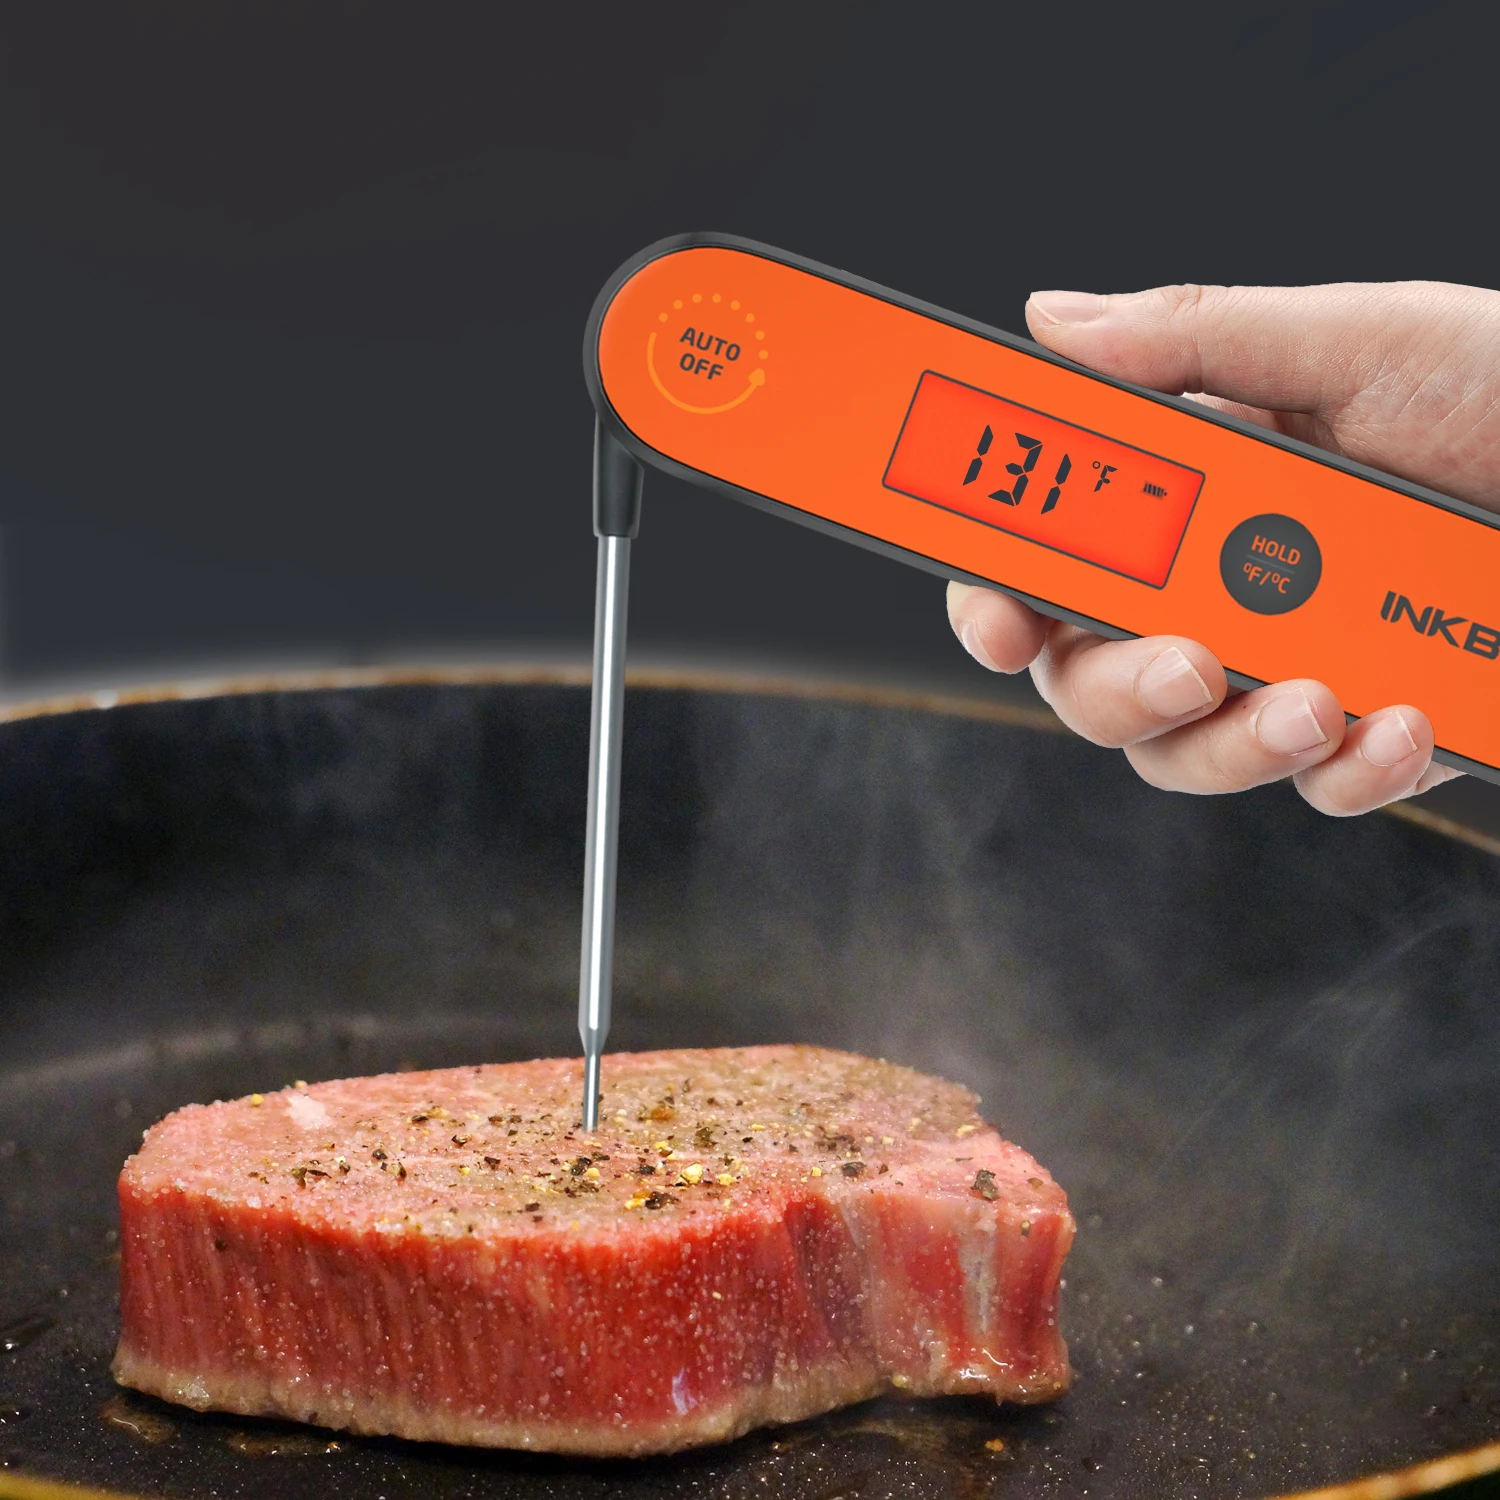 

IHT-1P Waterproof Digital Instant Read Meat Thermometer Cooking Food with Folding Probe for Deep Fry BBQ Both Indoor&Outdoor